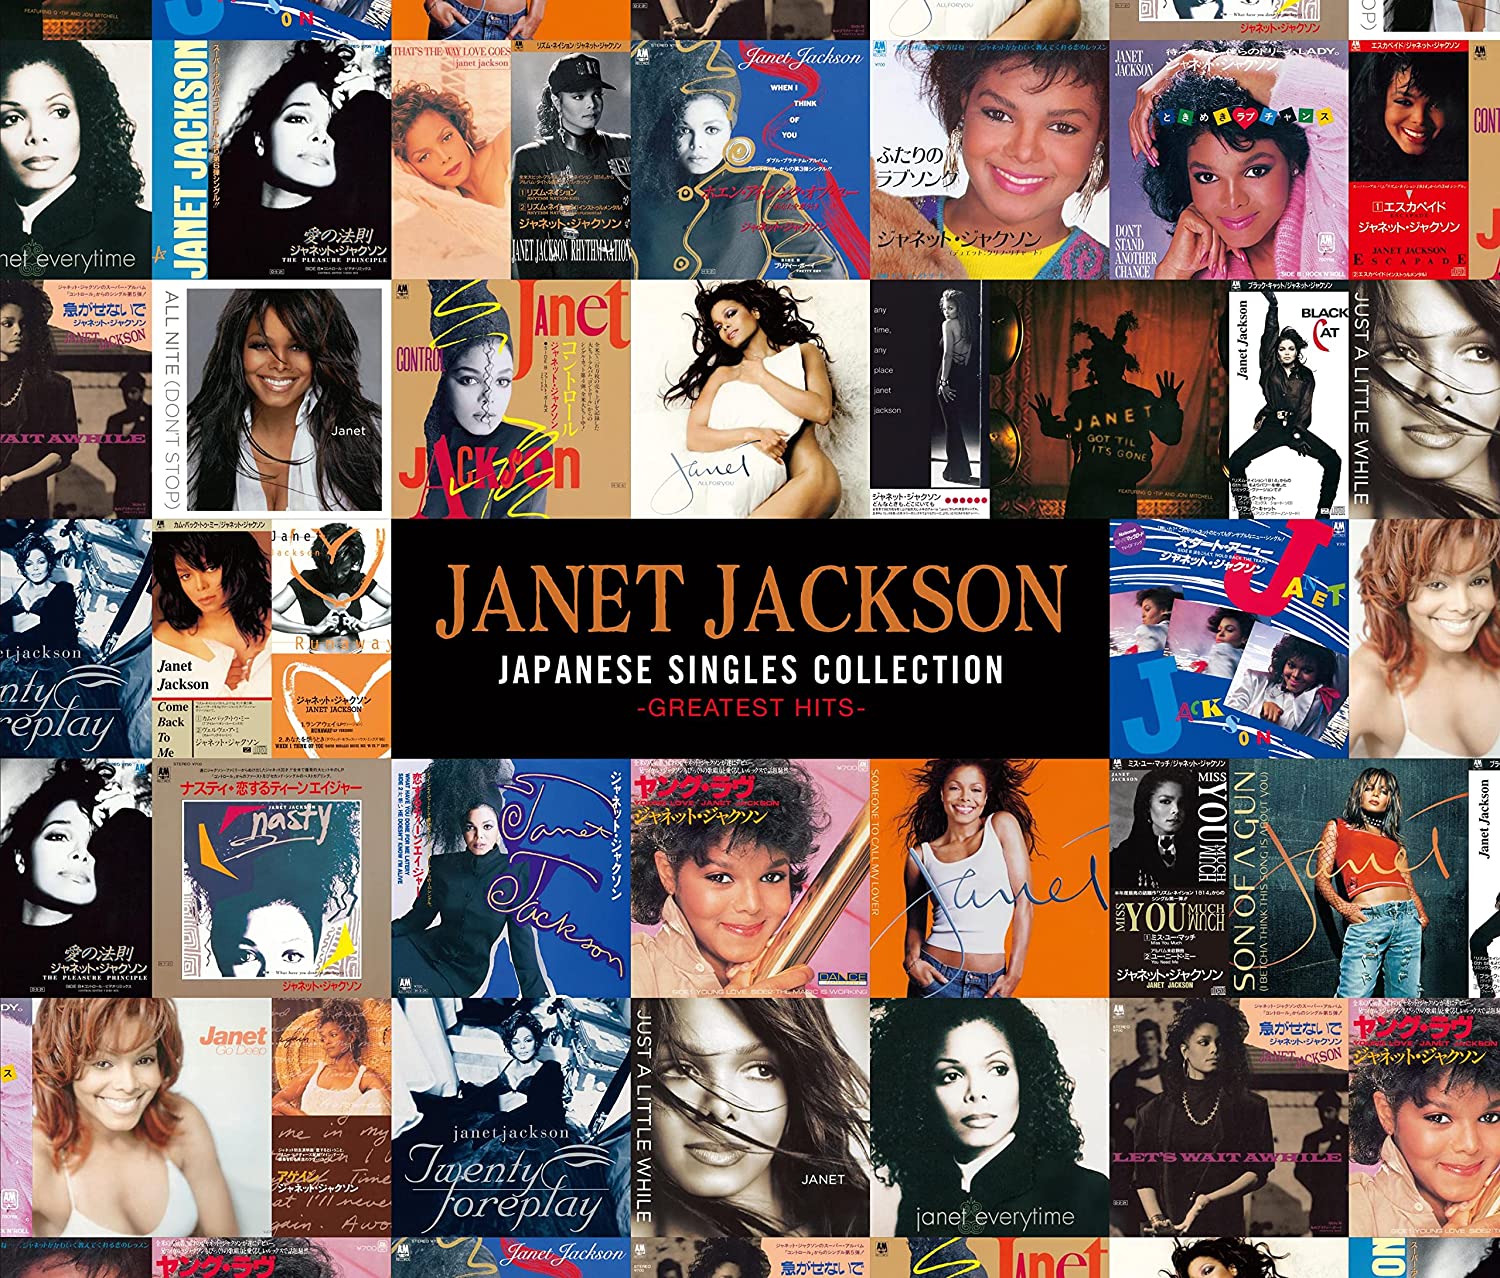 Janet Jackson / Japanese Singles Collection: Greatest Hits 2CD+DVD